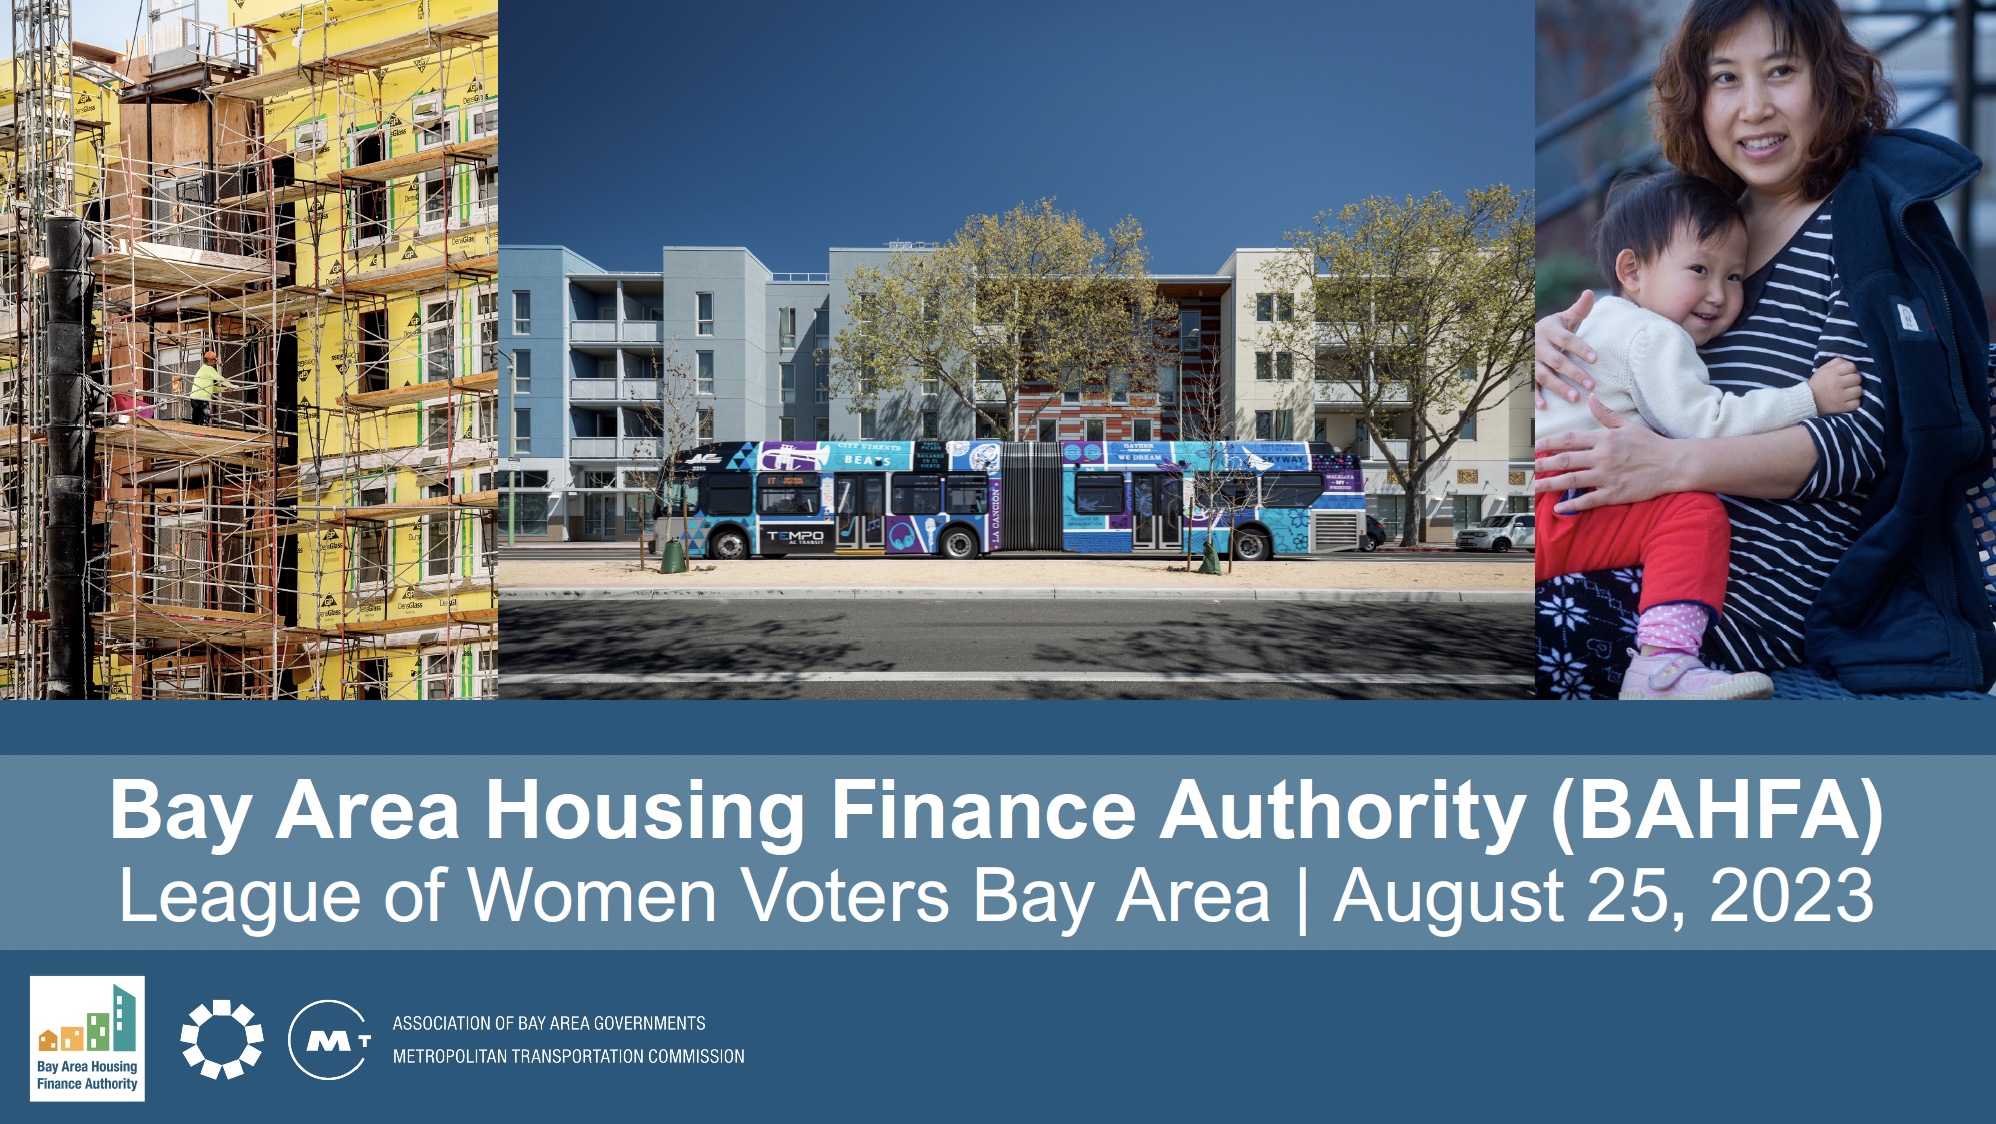 Bay Area Housing Finance Authority Event